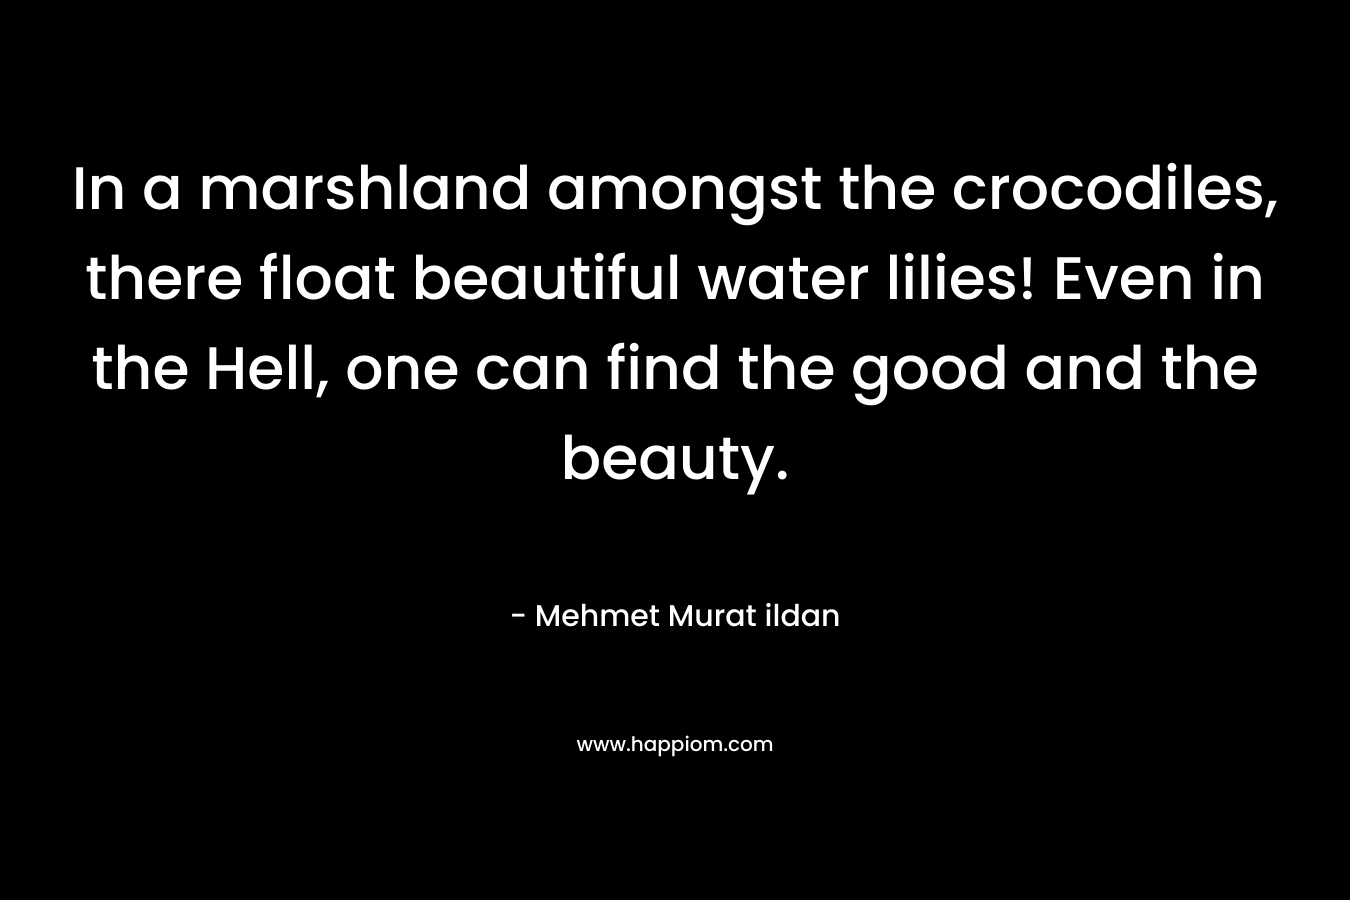 In a marshland amongst the crocodiles, there float beautiful water lilies! Even in the Hell, one can find the good and the beauty.